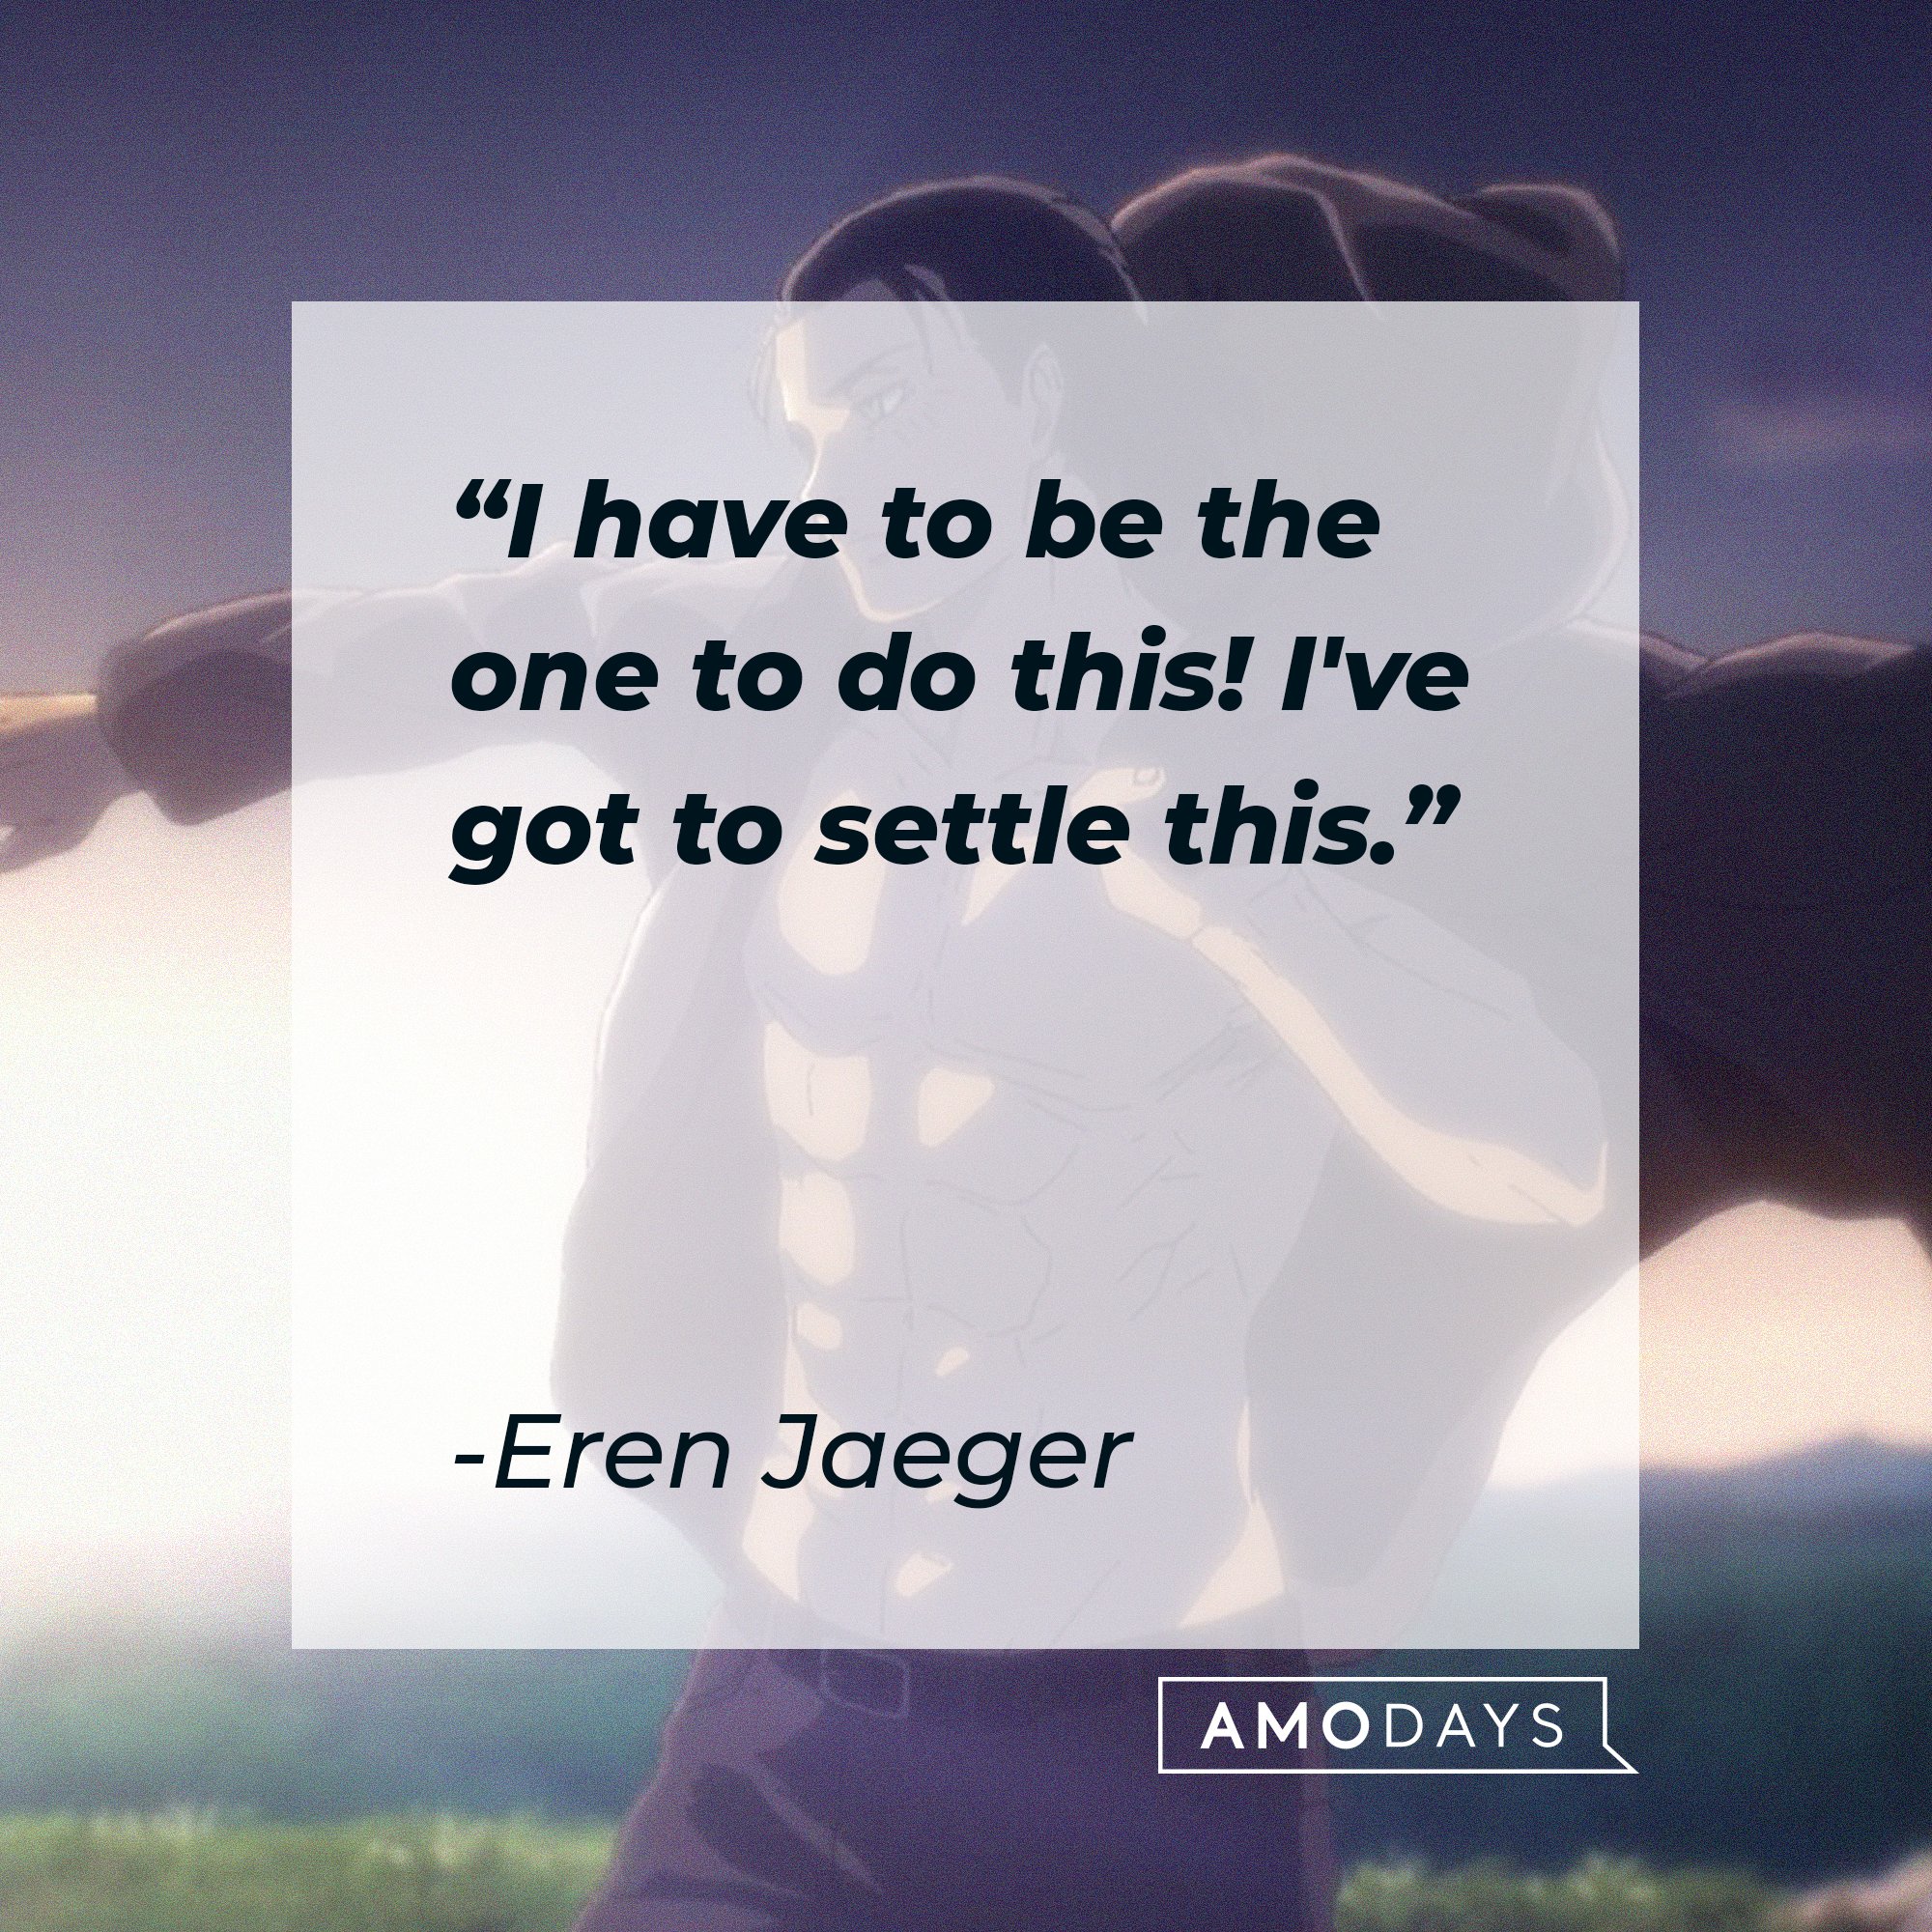 Eren Jaeger’s quote: "I have to be the one to do this! I've got to settle this." | Image: AmoDays